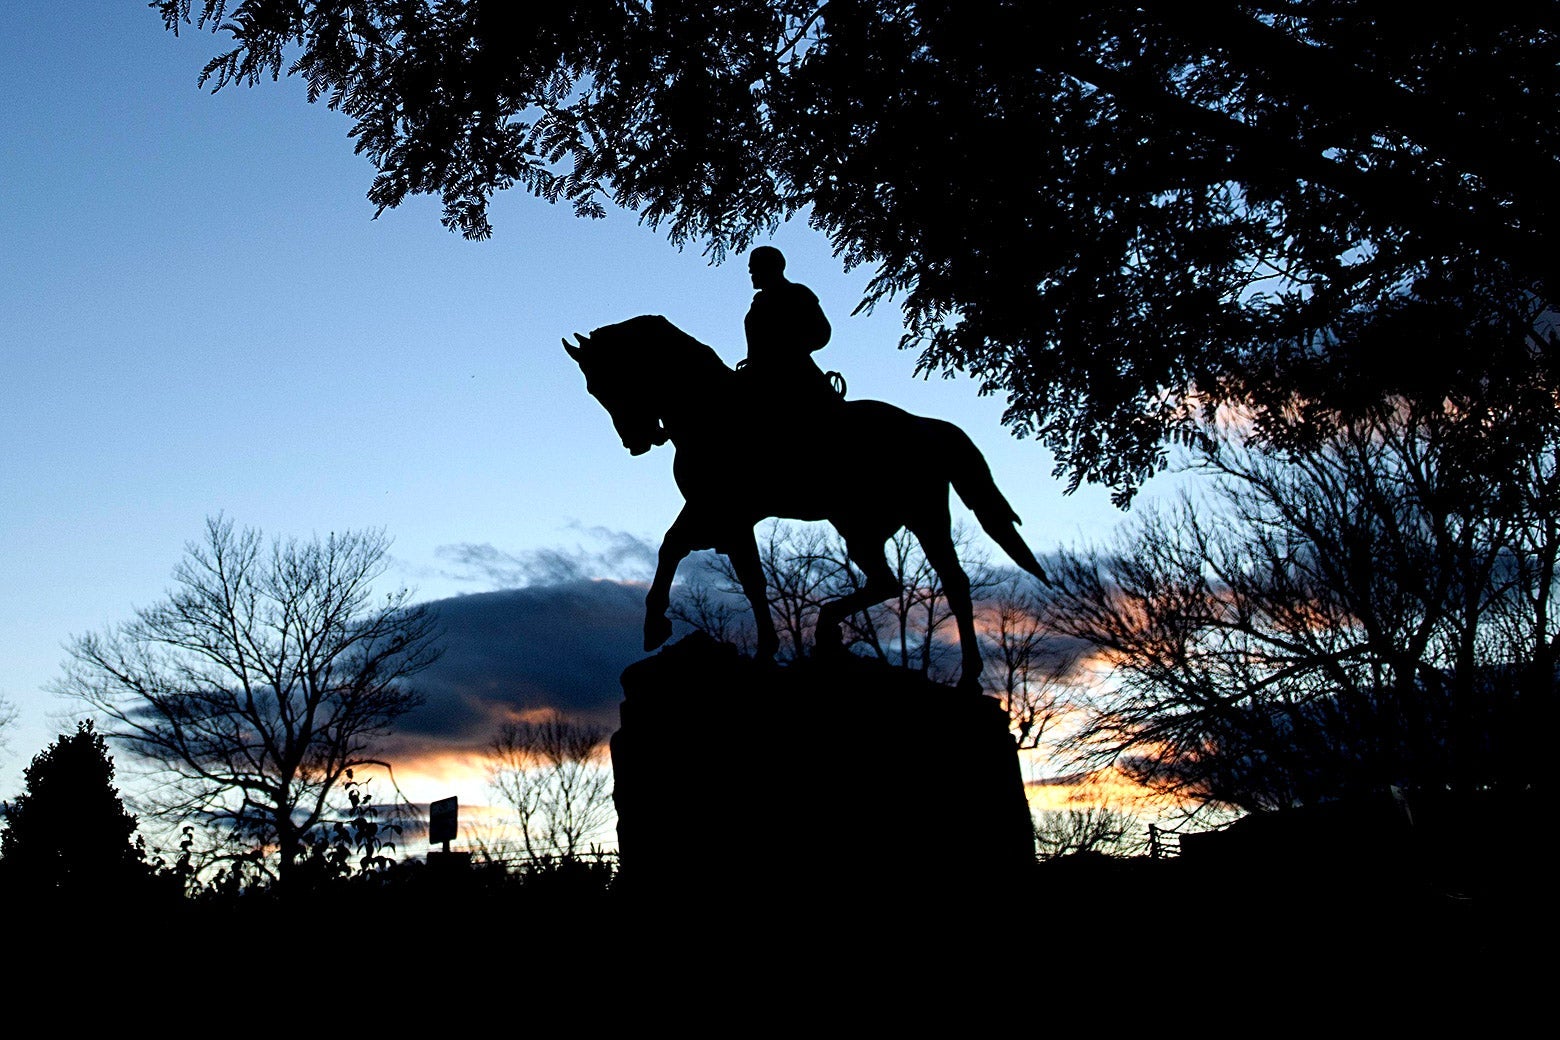 Silhouette of the statue at dusk